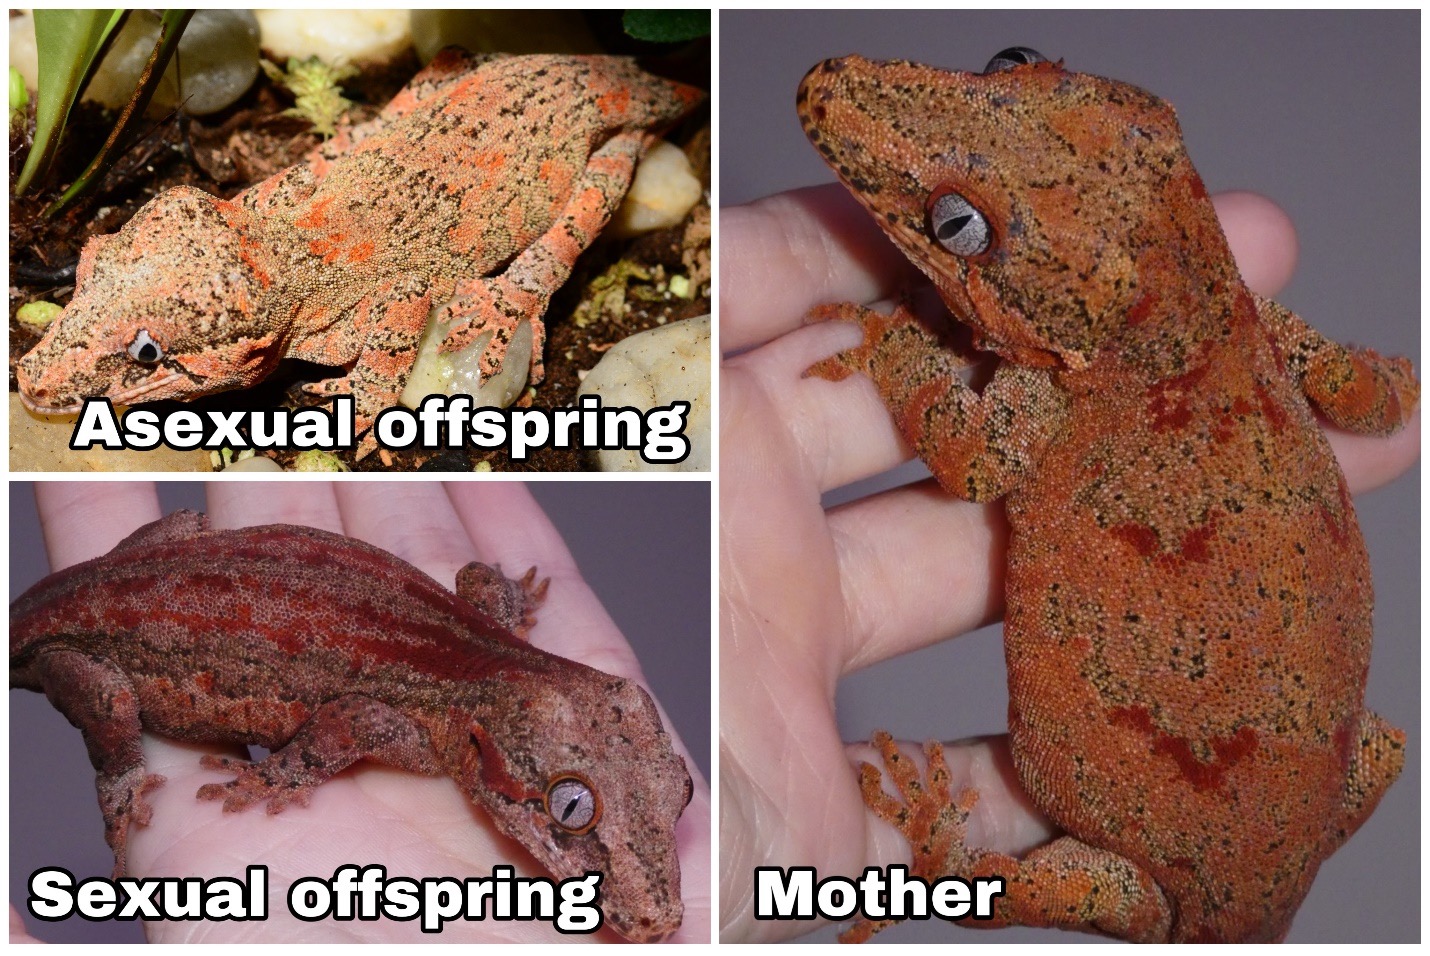 Asexual and sexual offspring in Geckos